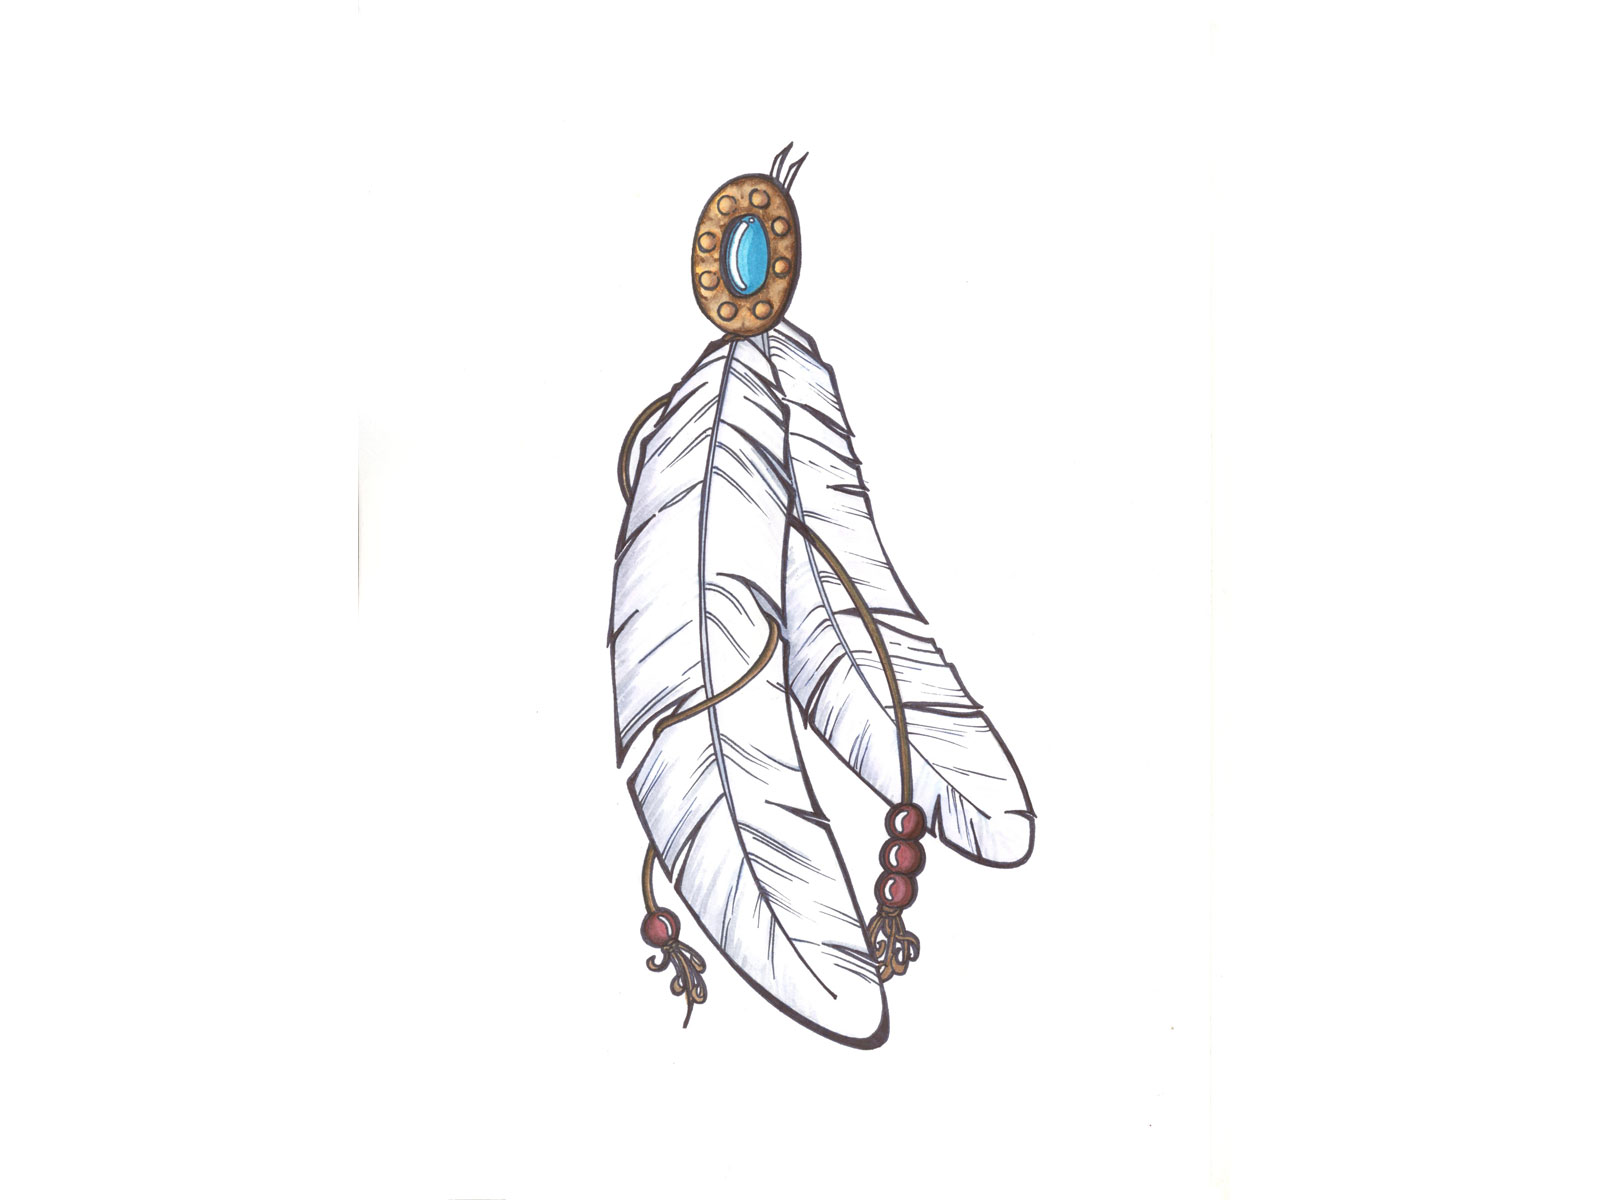 Stunning Native American Feather Tattoo Meanings  Ideas  TatRing